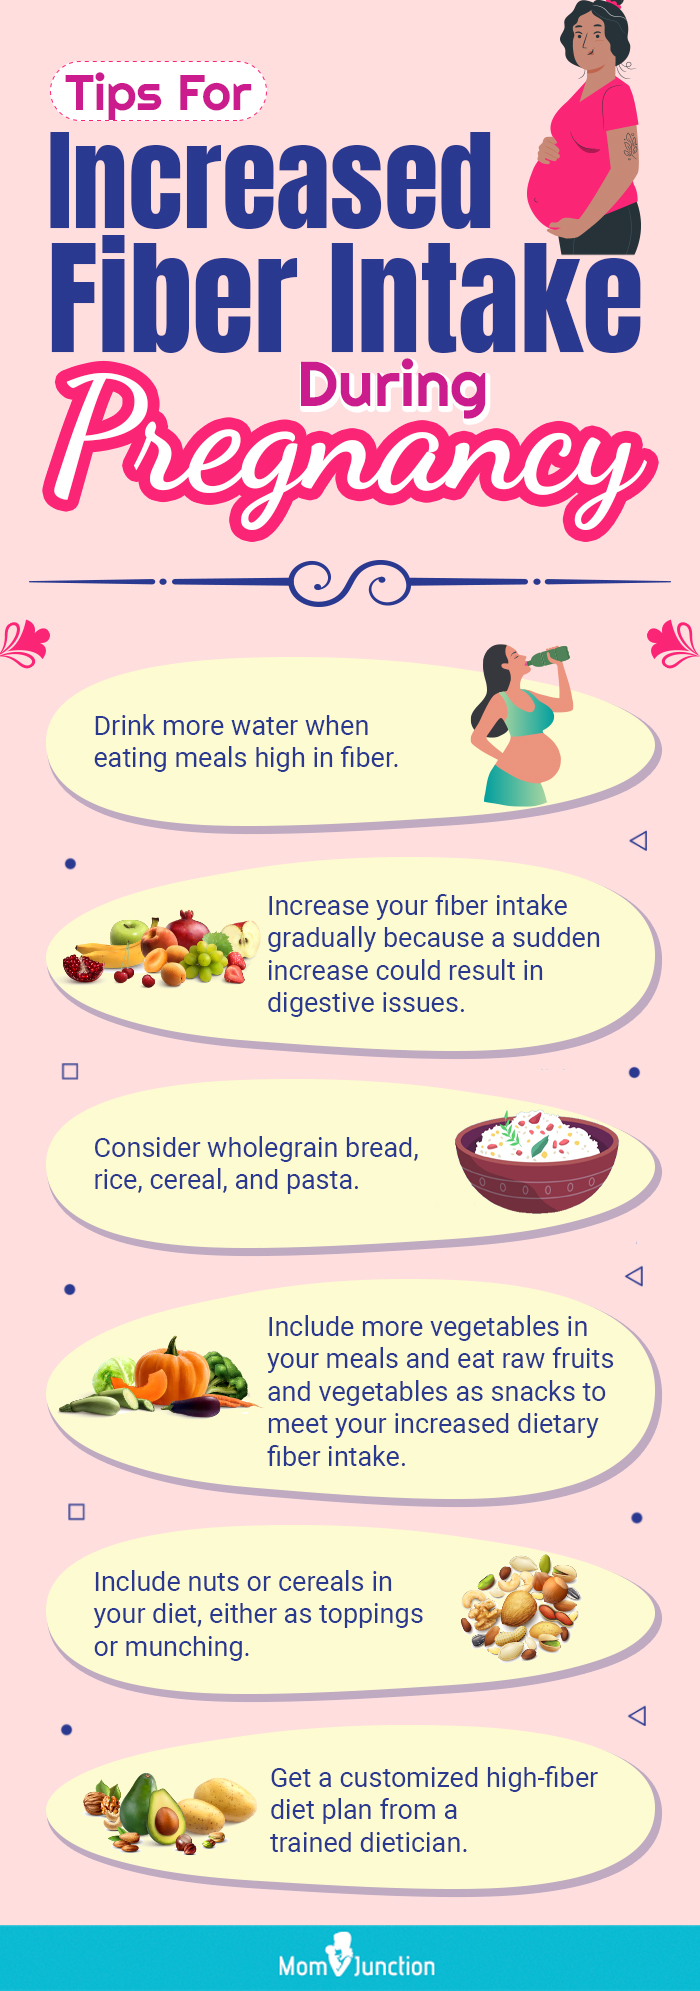 tips for increased fiber intake during pregnancy (infographic)